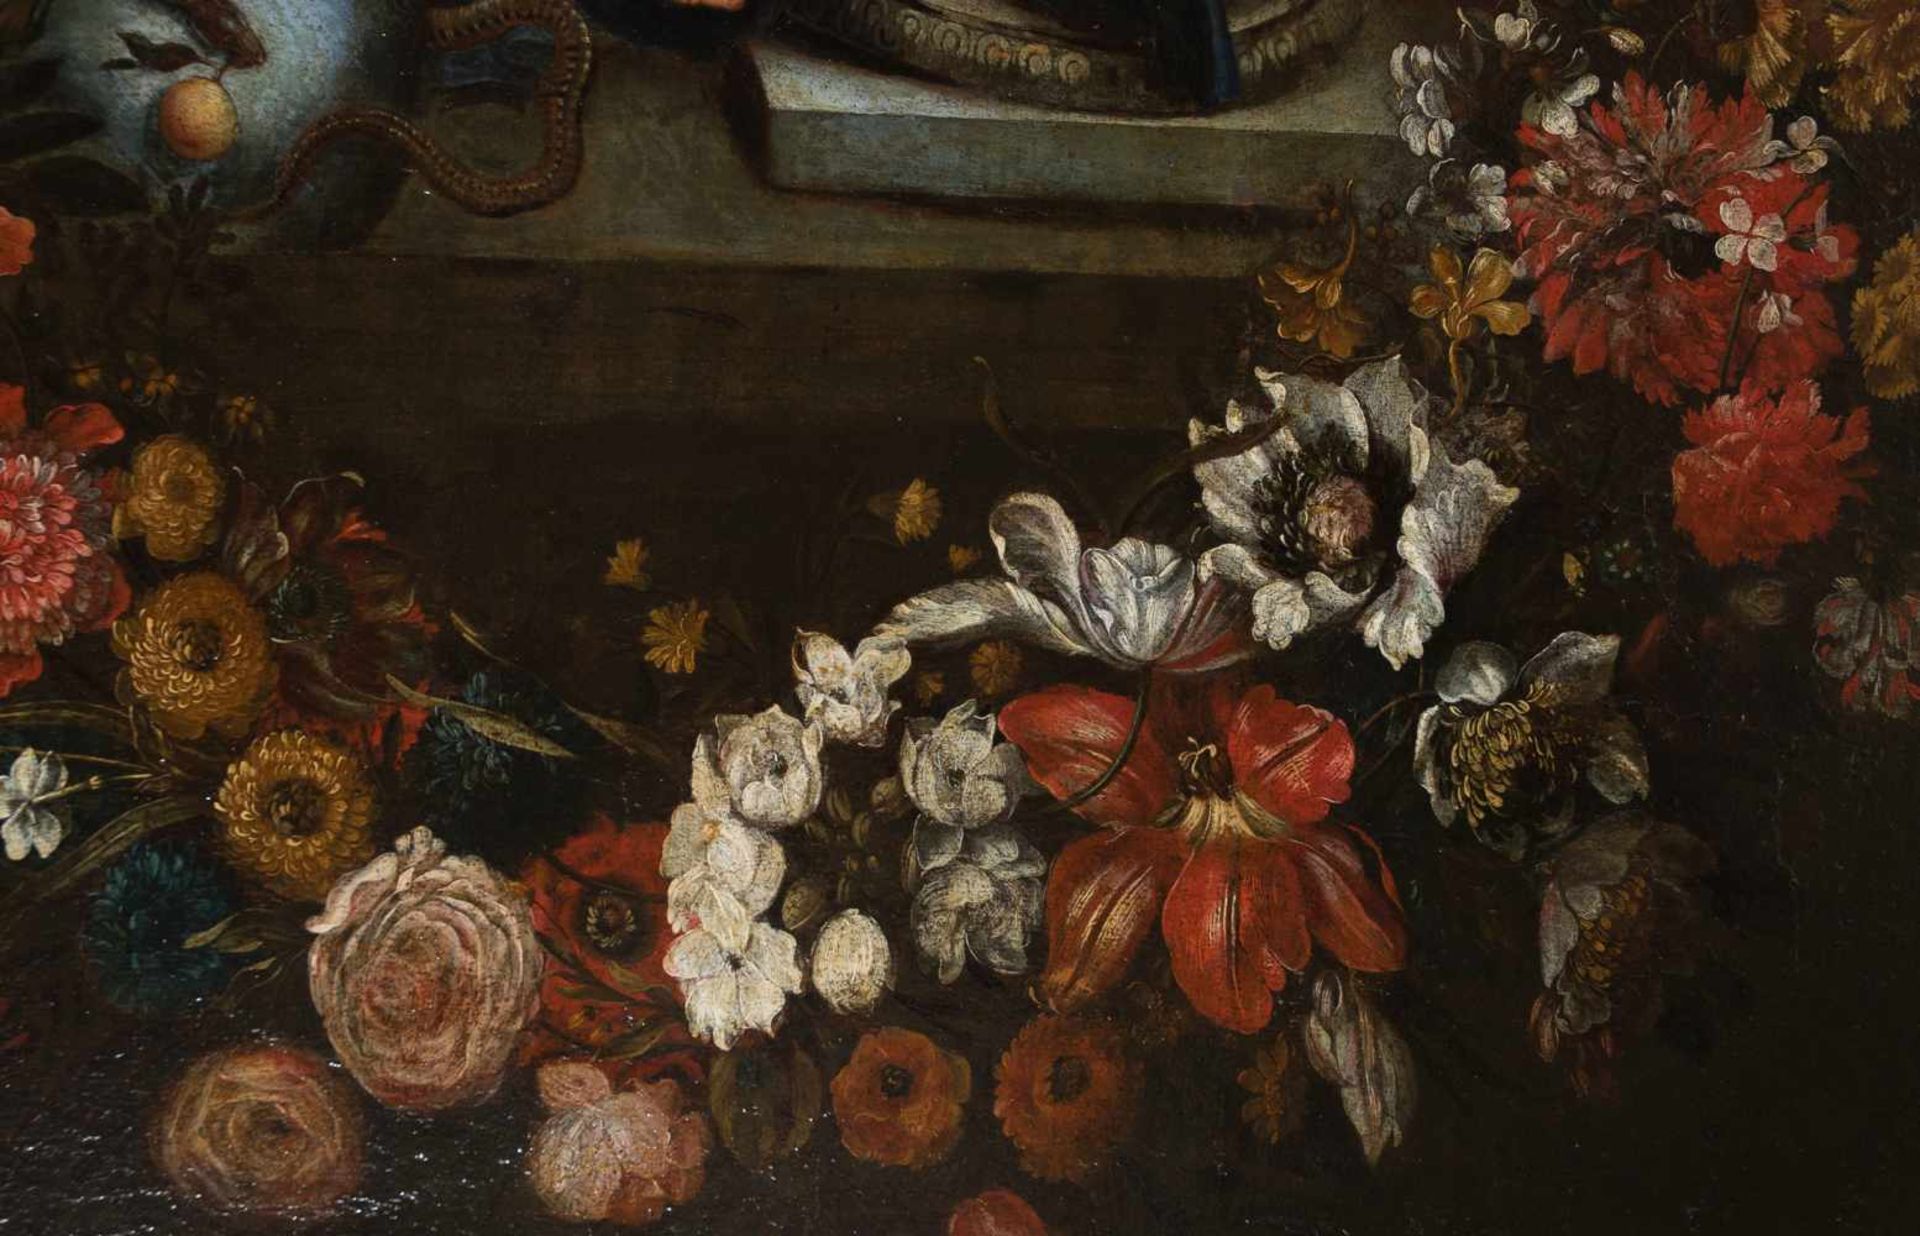 17th century French School. "Holy Family with a border of flowers" Oil on canvas 130 x 99 cm. - Bild 8 aus 10